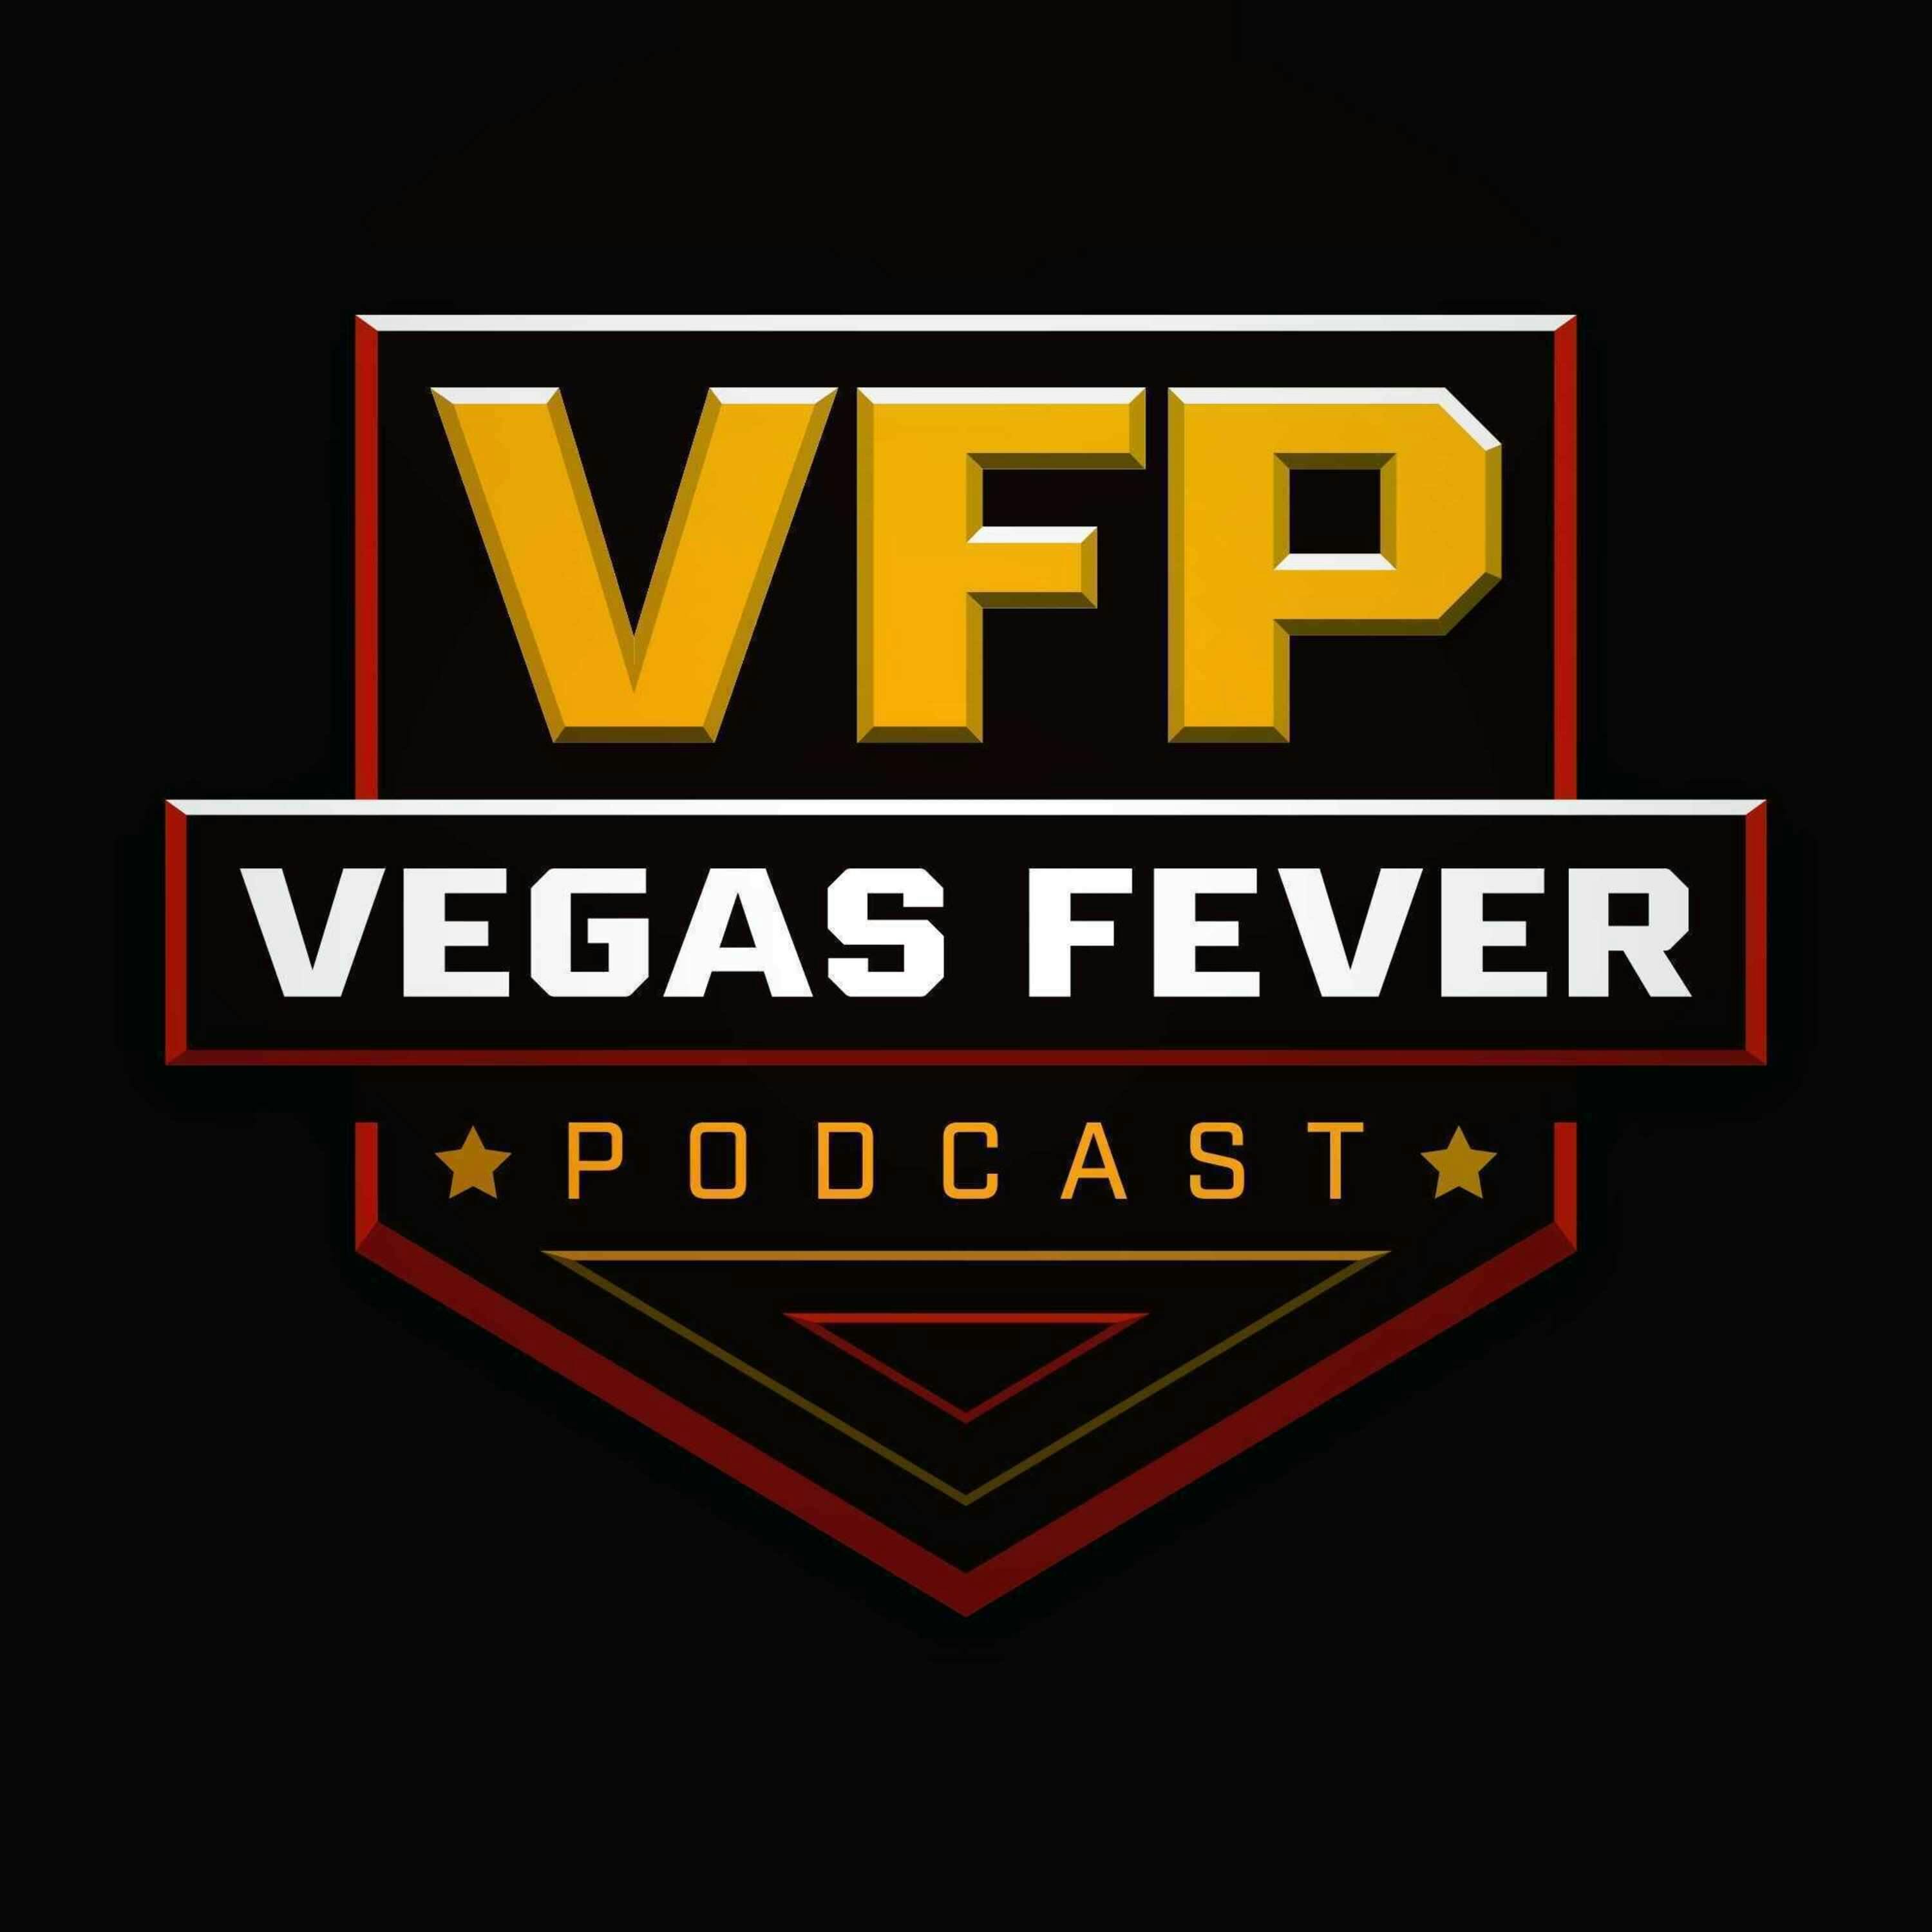 UNLV & VGK schedule talk as we inch closer to the start of the season for both. A’s talk aswell.